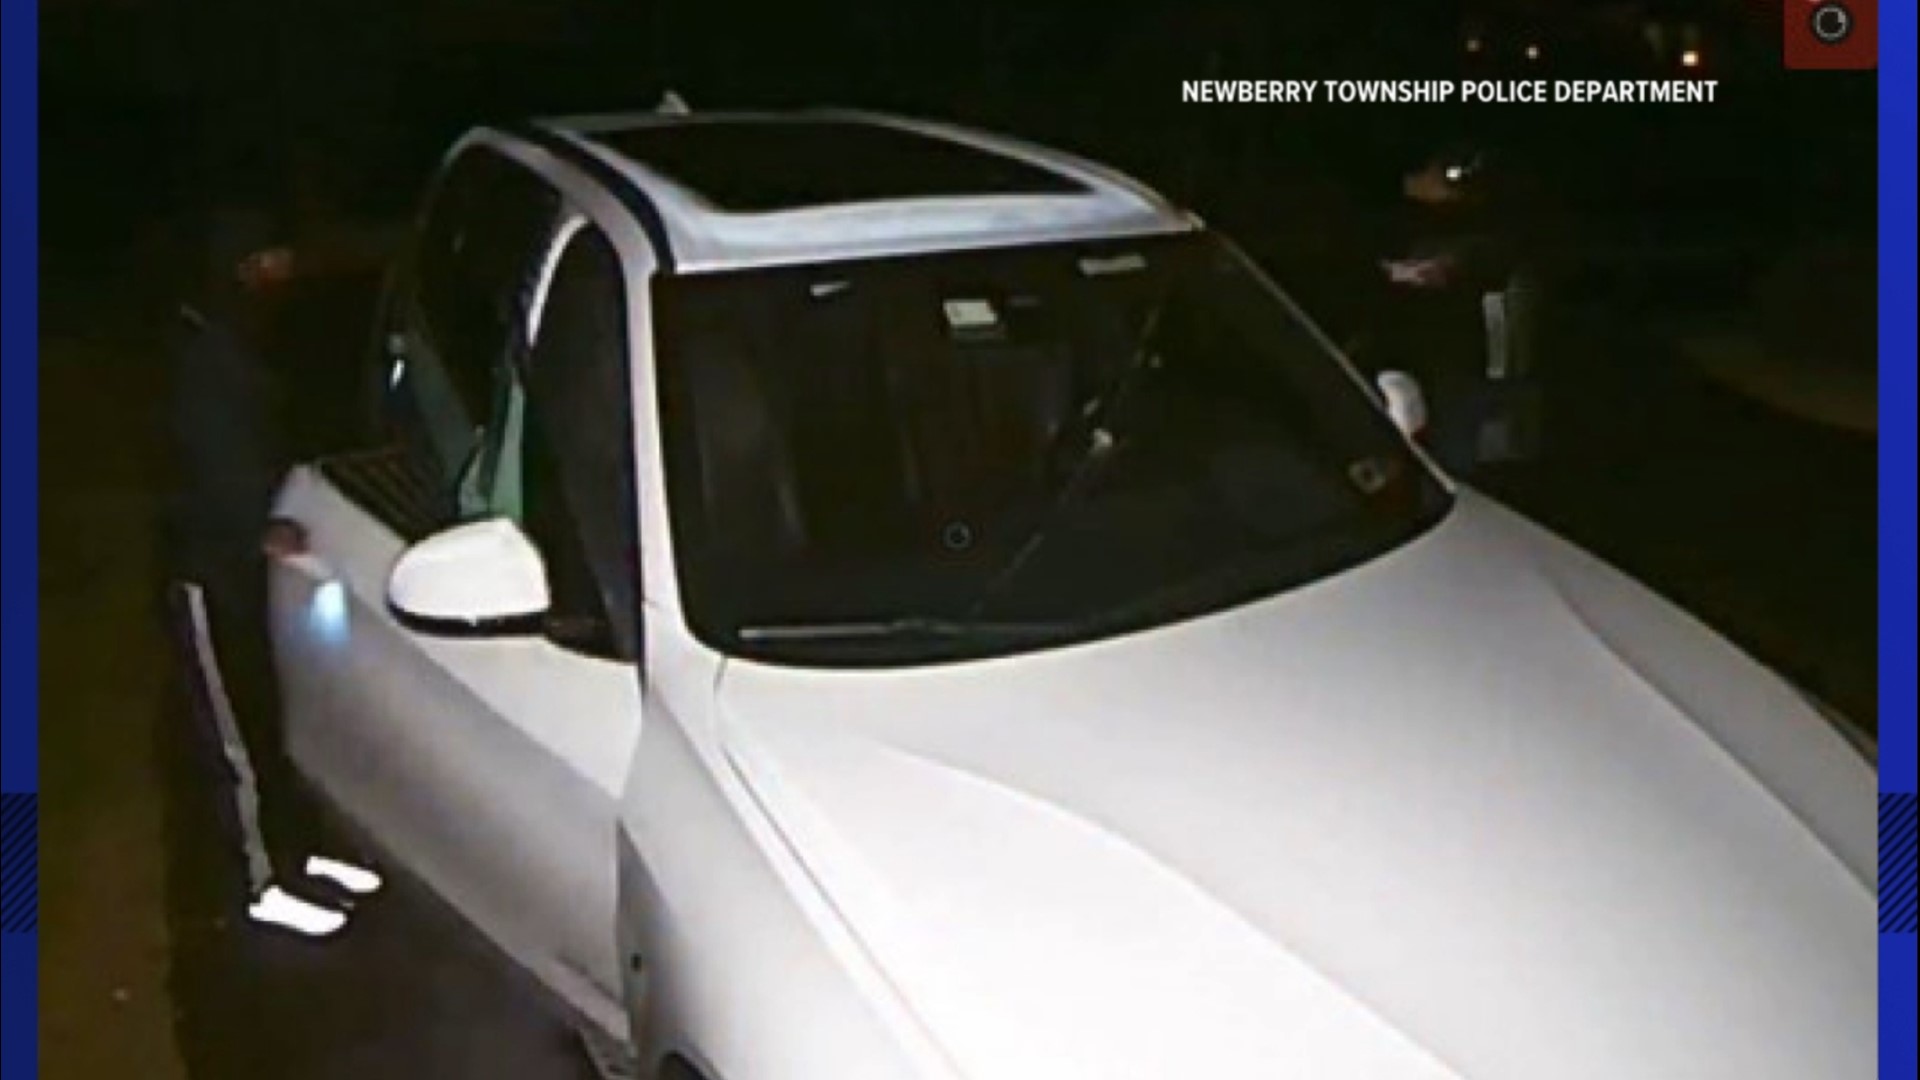 Dozens of unlocked vehicles were robbed early in the morning of May 16 in Newberry Township.